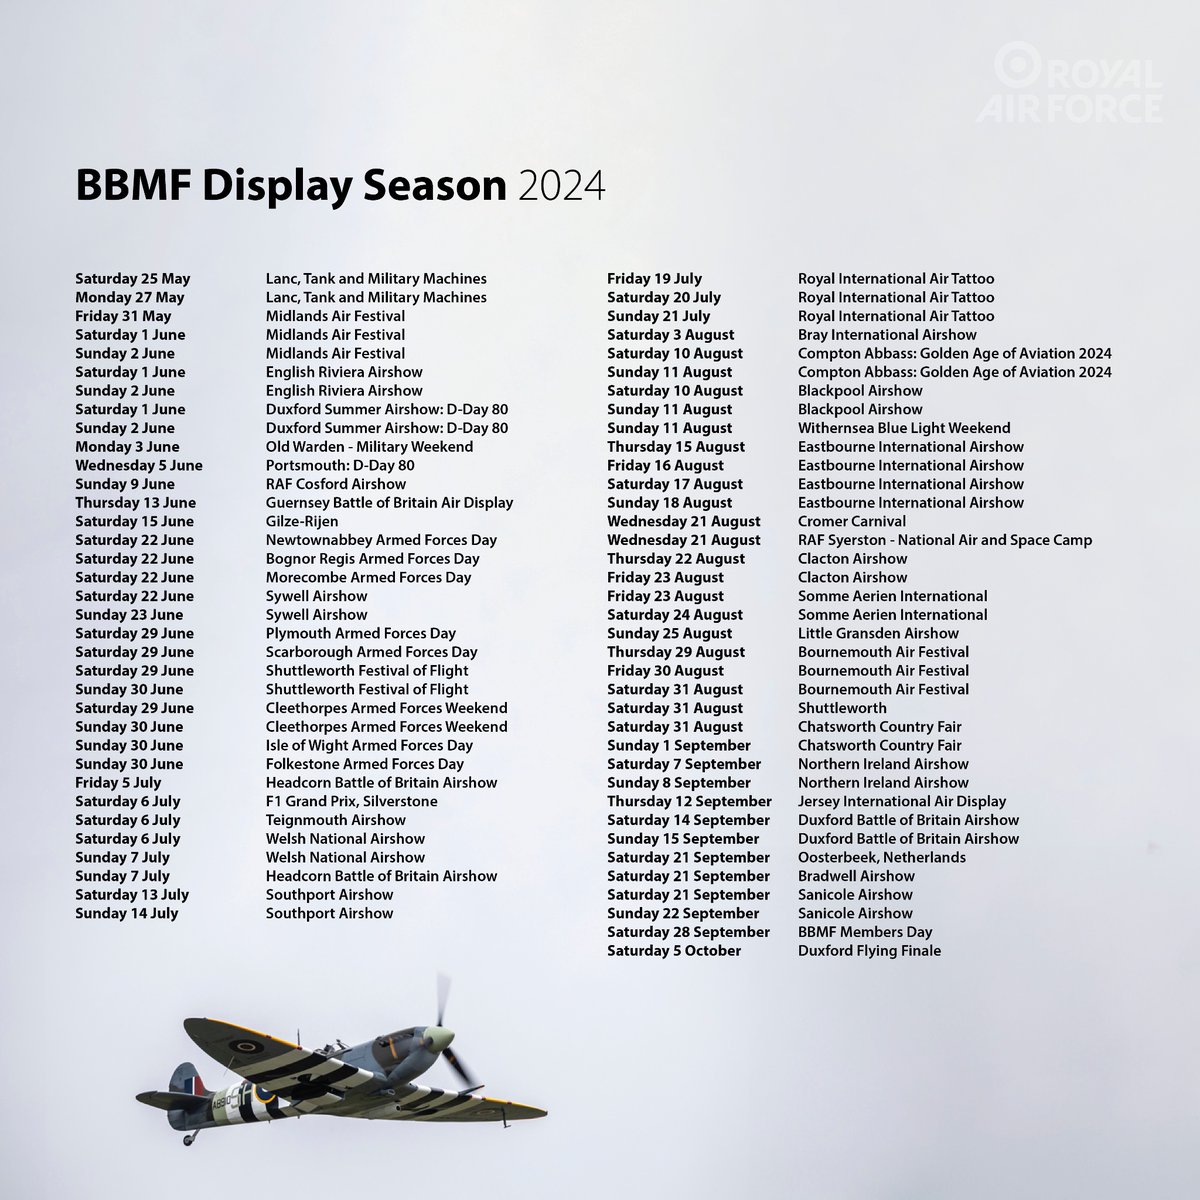 Are you ready for the summer? ☀️🕶️ We certainly are, and we are delighted to announce the dates and events included in our 2024 Display Season! As usual, this list is for full displays only, and does not include individual flypasts ✈️ bit.ly/2024Displays